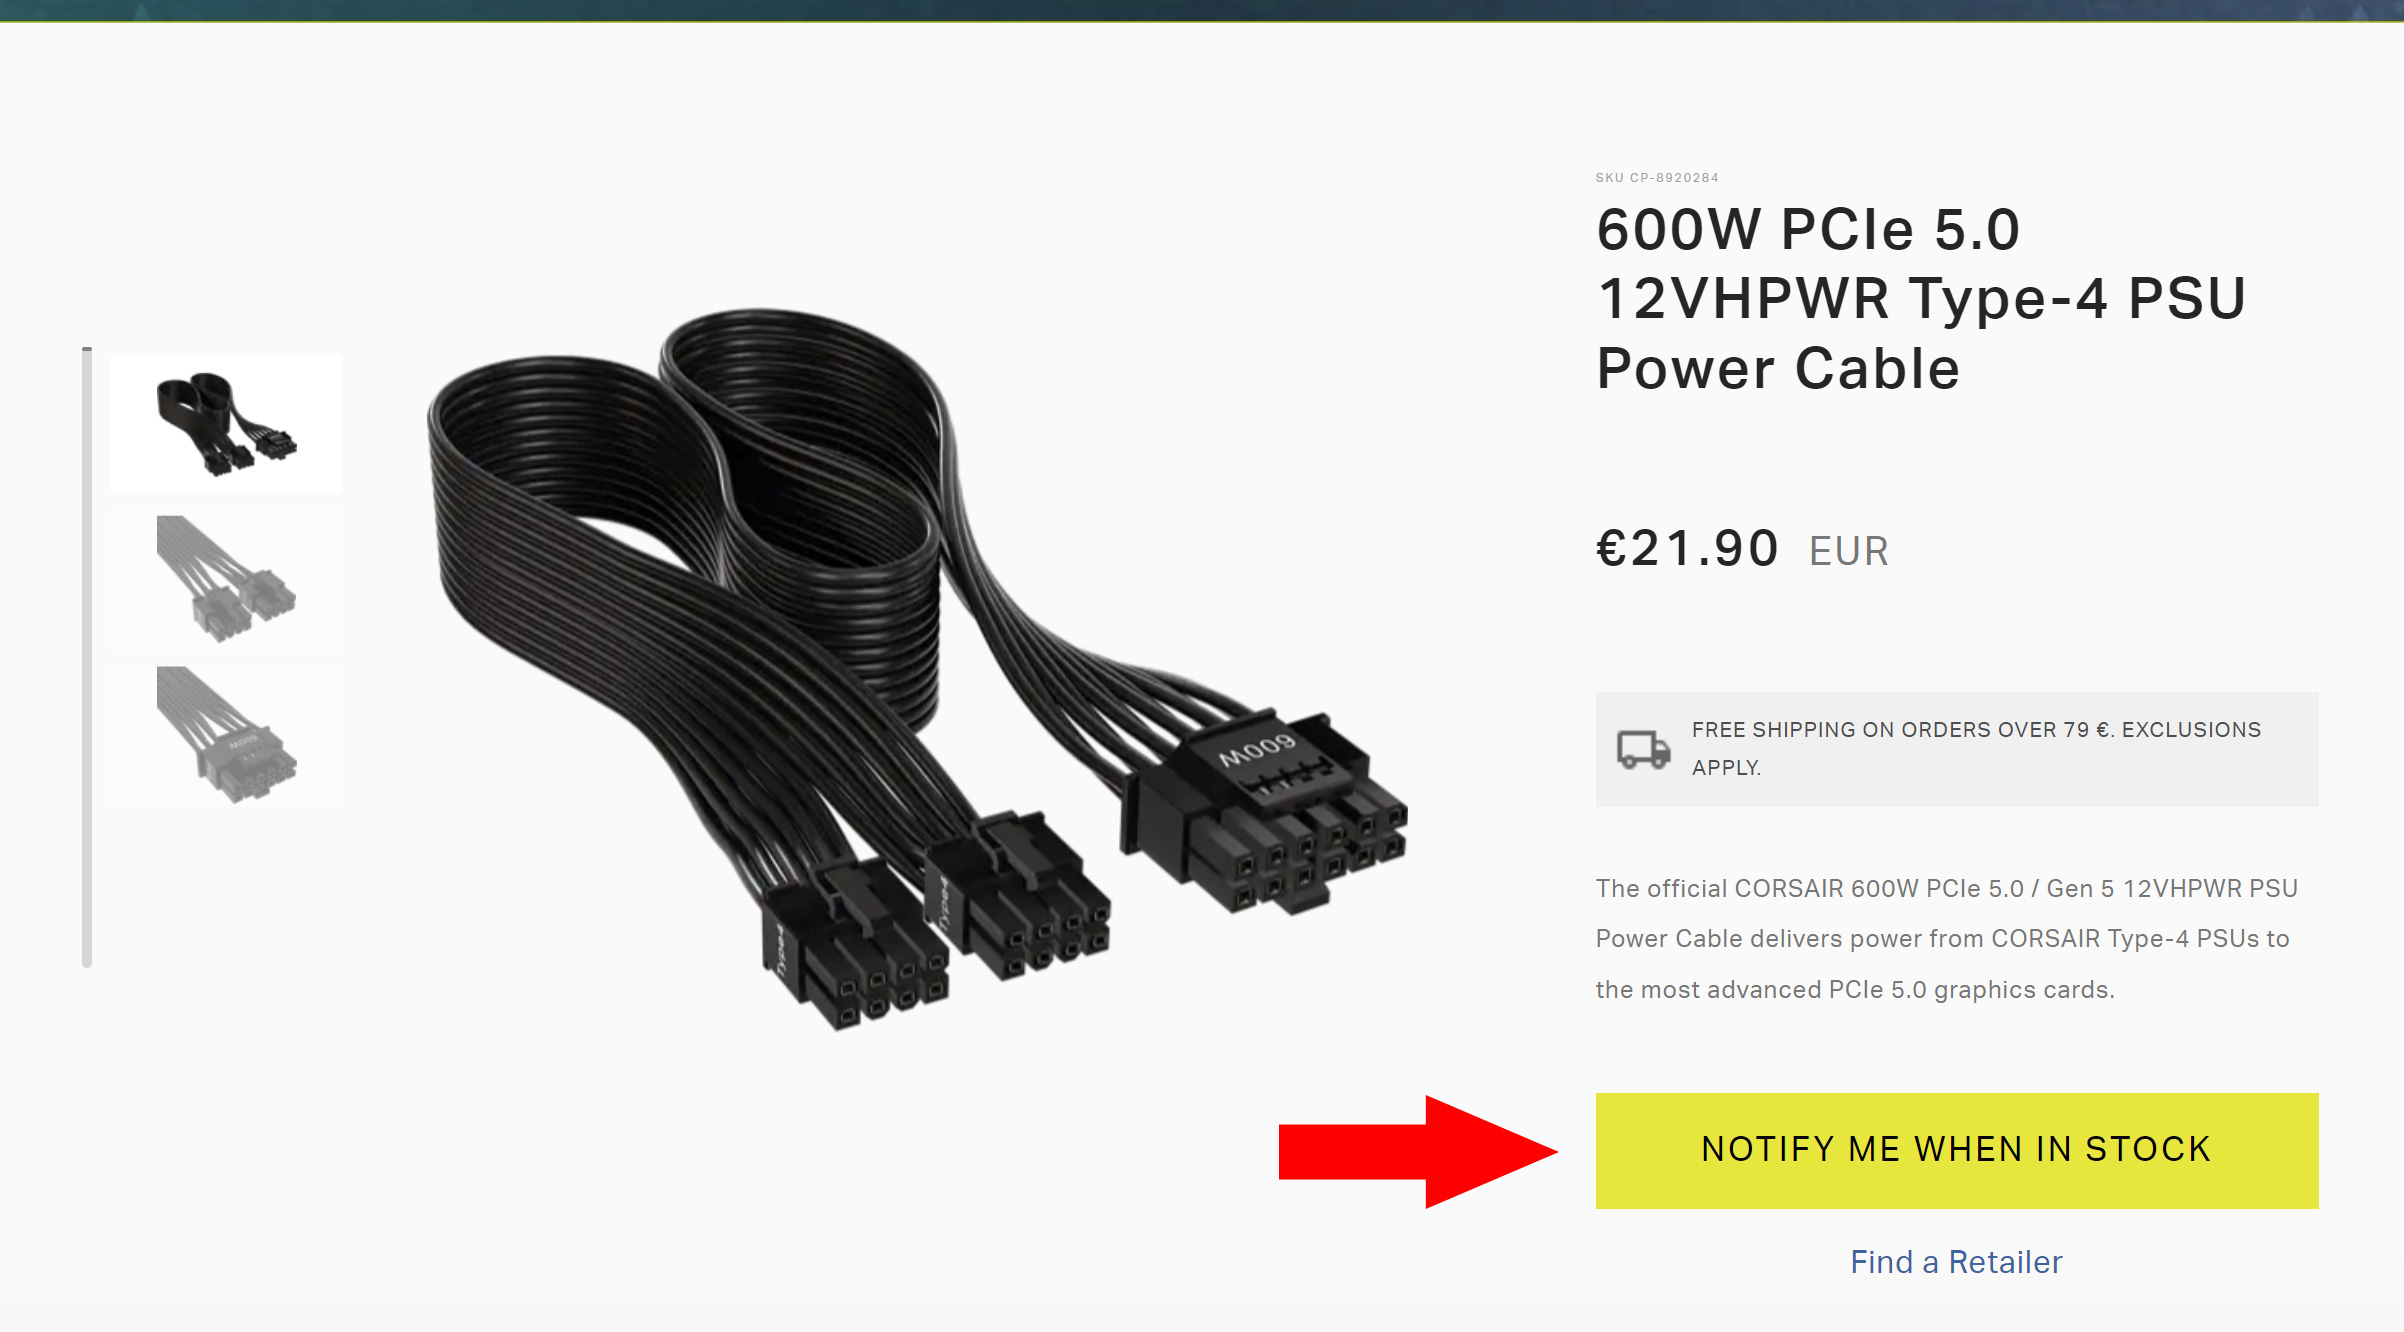 NVIDIA RTX 40 series and Corsair’s missing cable